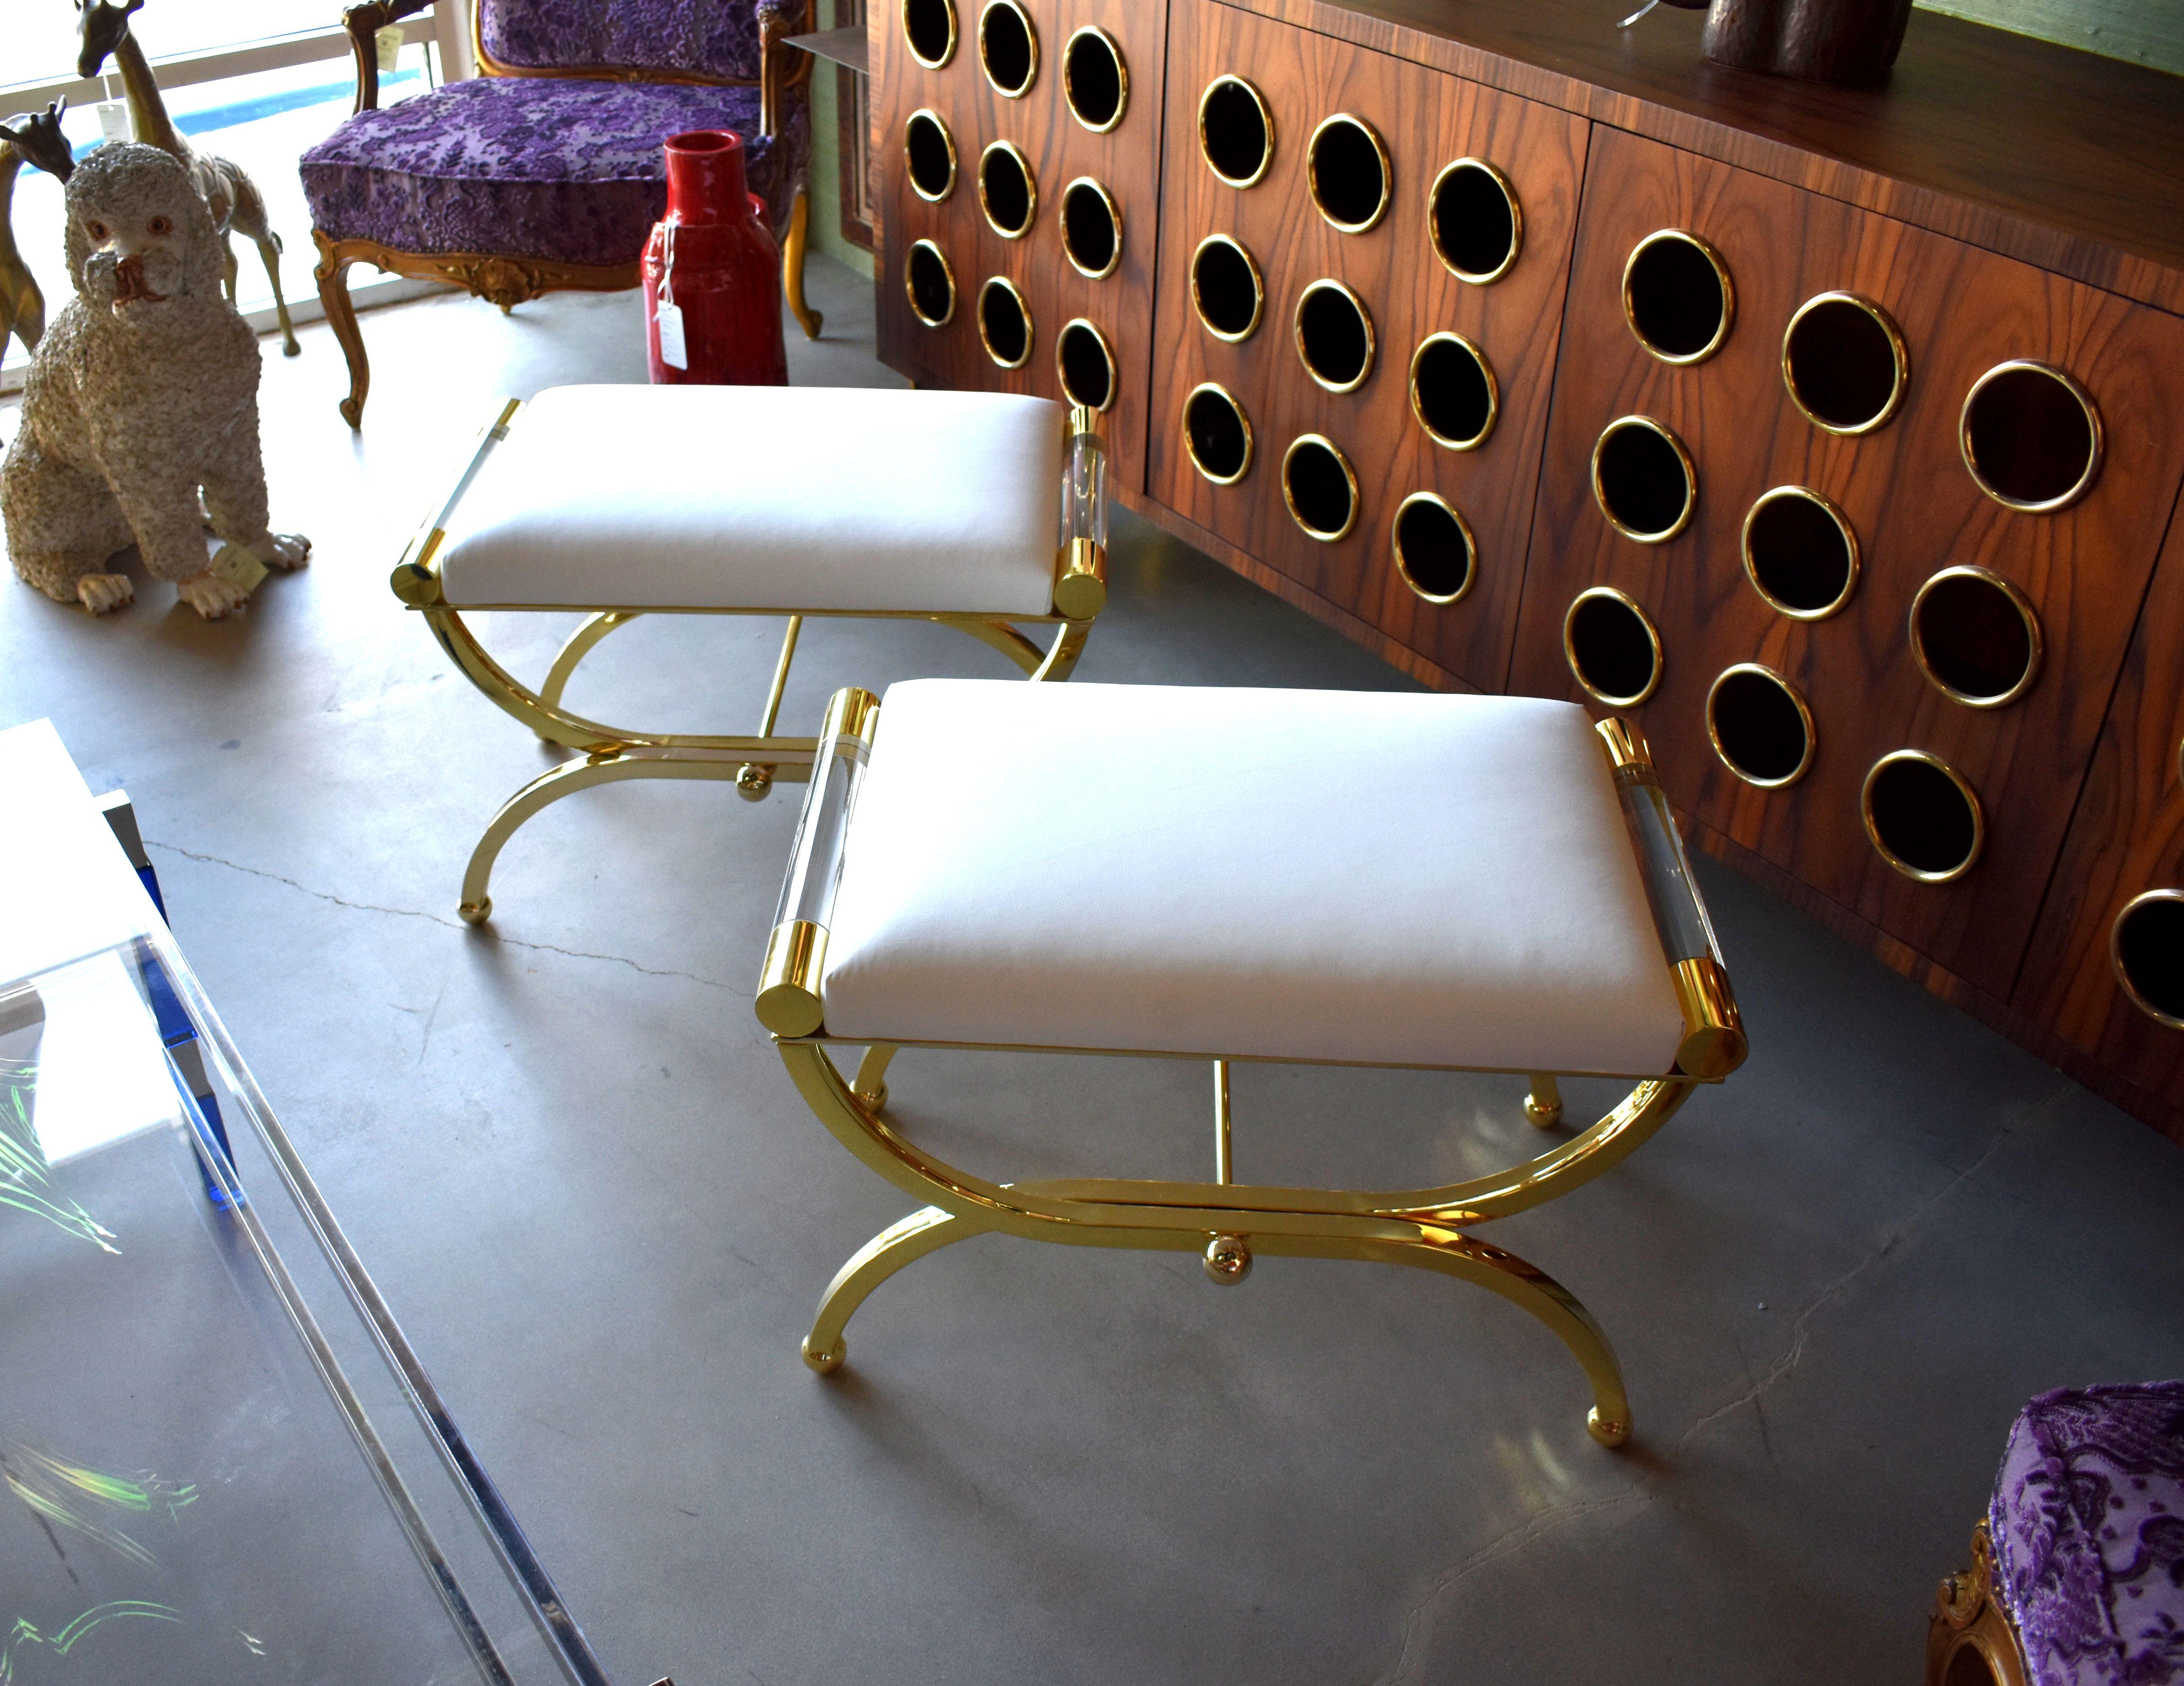 A pair of Regency benches design and signed by Charles Hollis Jones. Each bench is made of brass and Lucite with a faux white leather cushion.

Provenance directly from CHJ.

About Charles Hollis Jones:

Charles Hollis Jones is an American artist